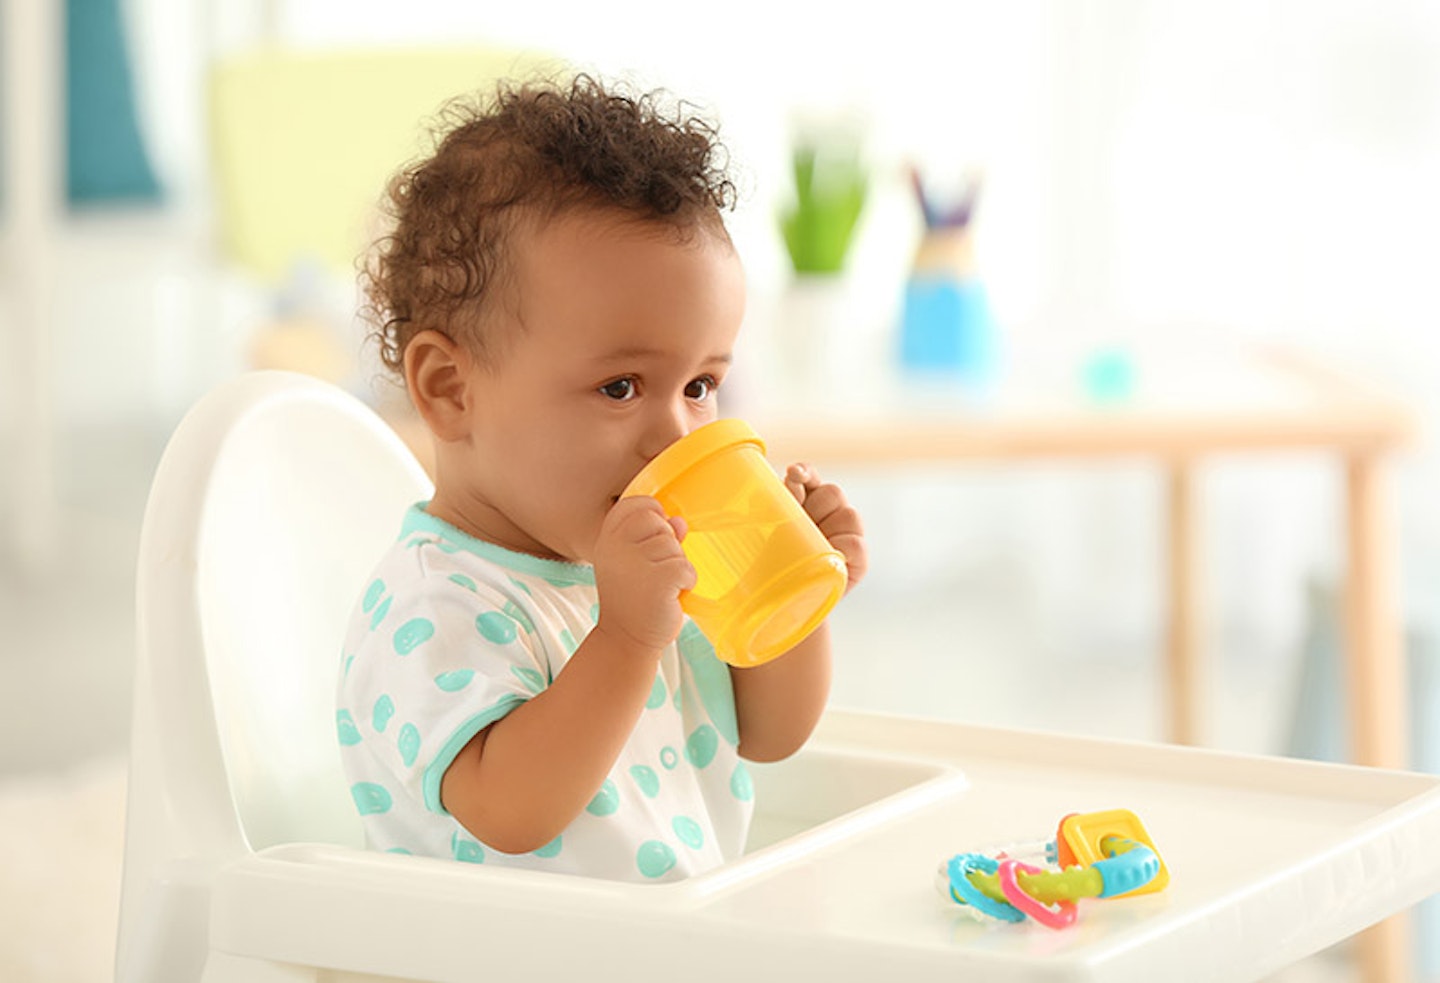 Keep your baby hydrated